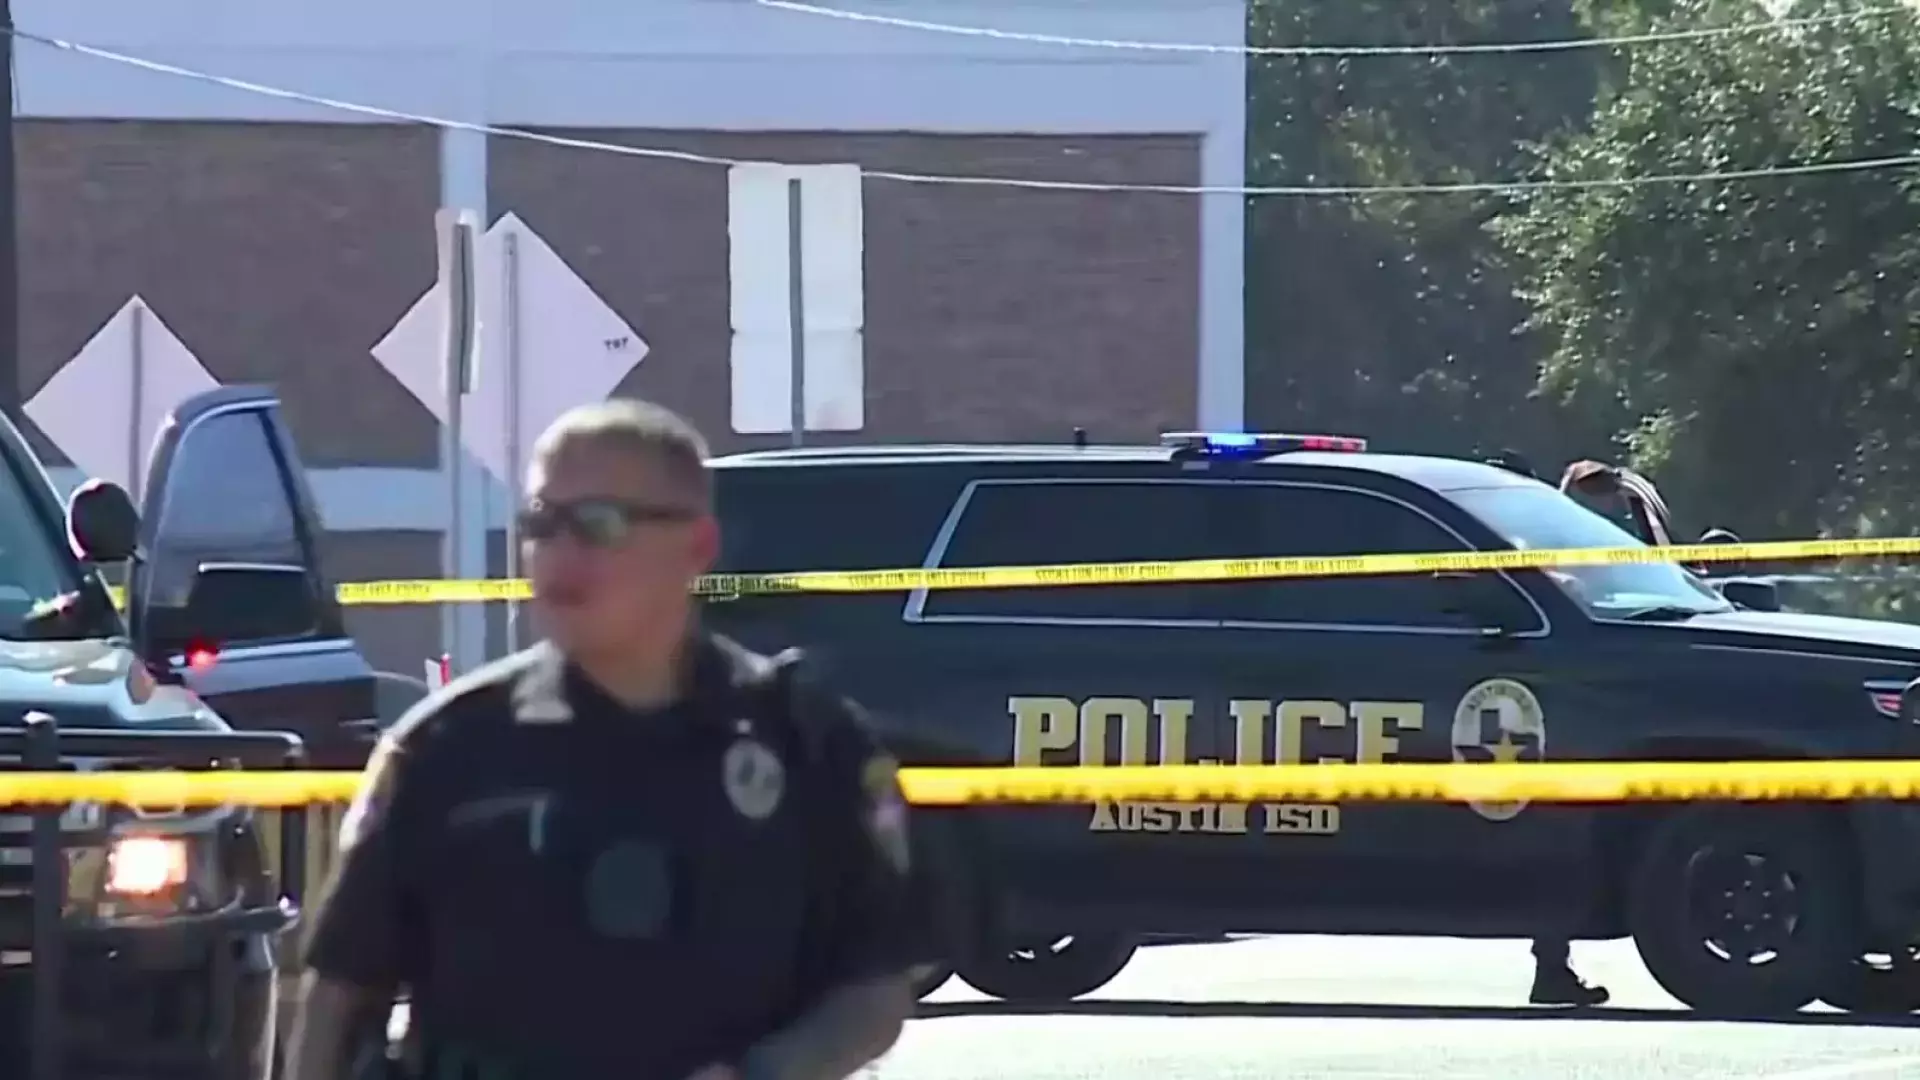 6 dead, 3 wounded in shooting rampage in 2 Texas cities in US